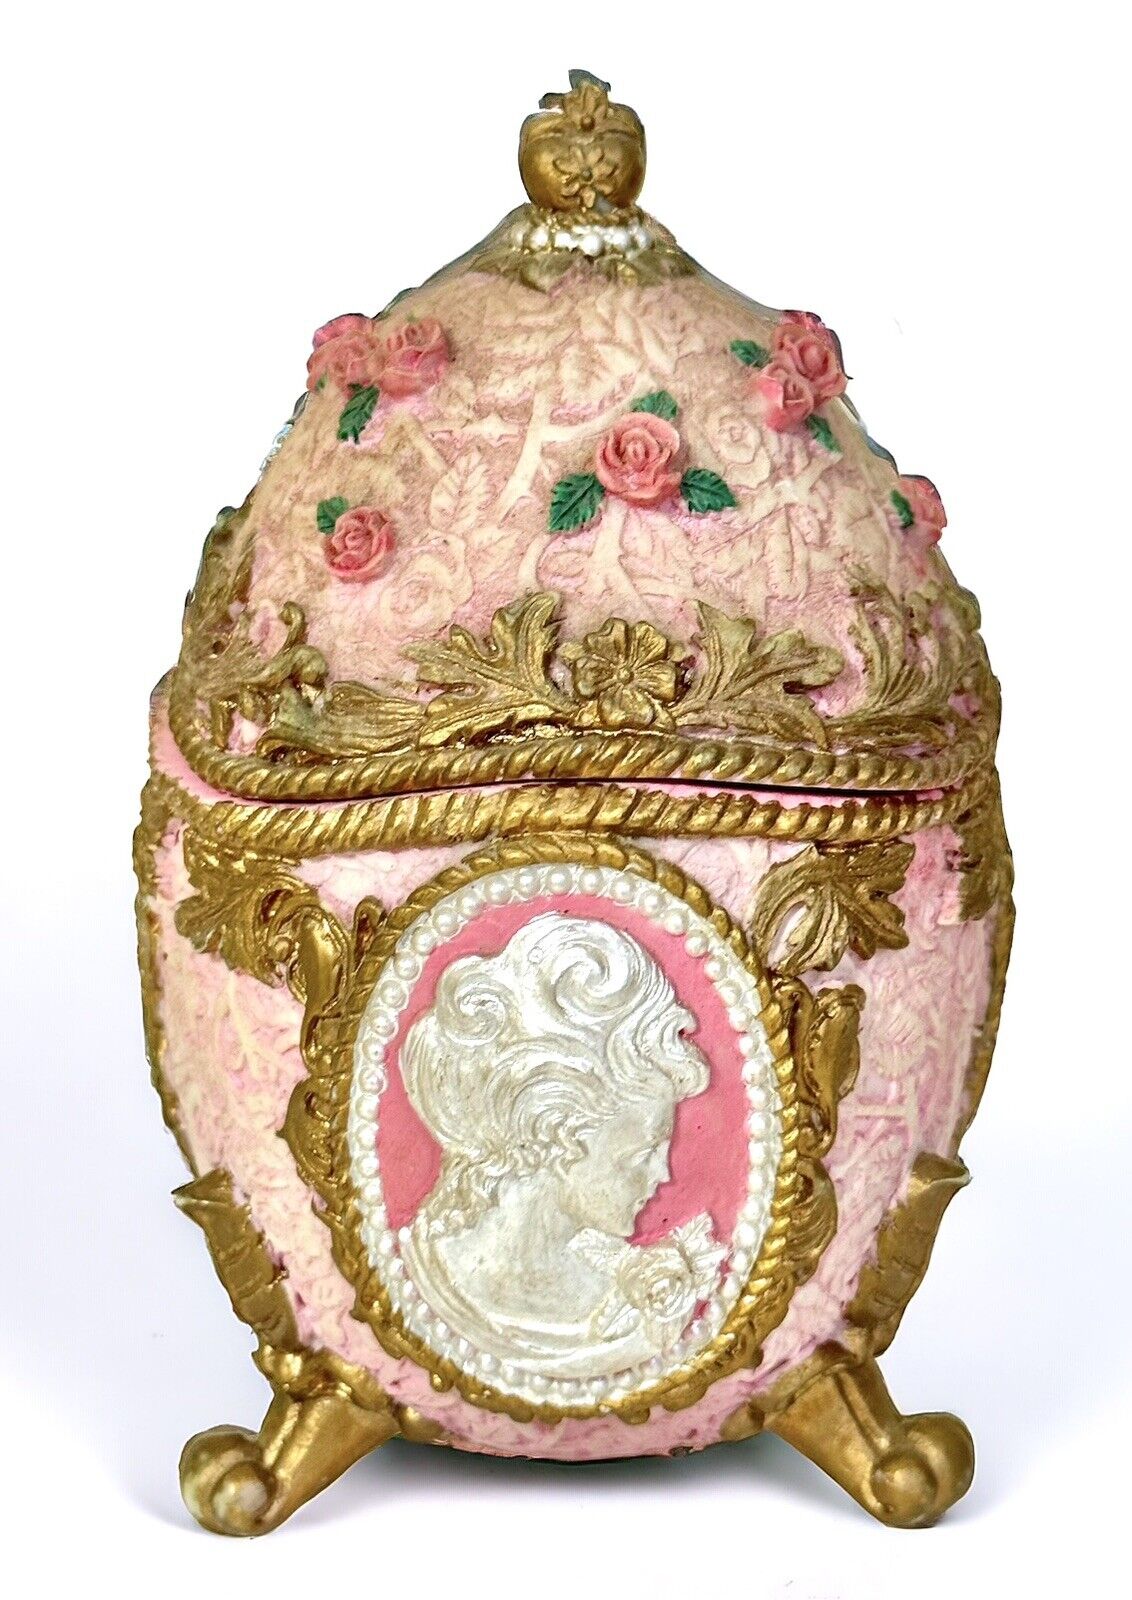 Egg Trinket Music Box Pink Floral Cameo Jewelry The Rose Decor 5” Mcm Vintage